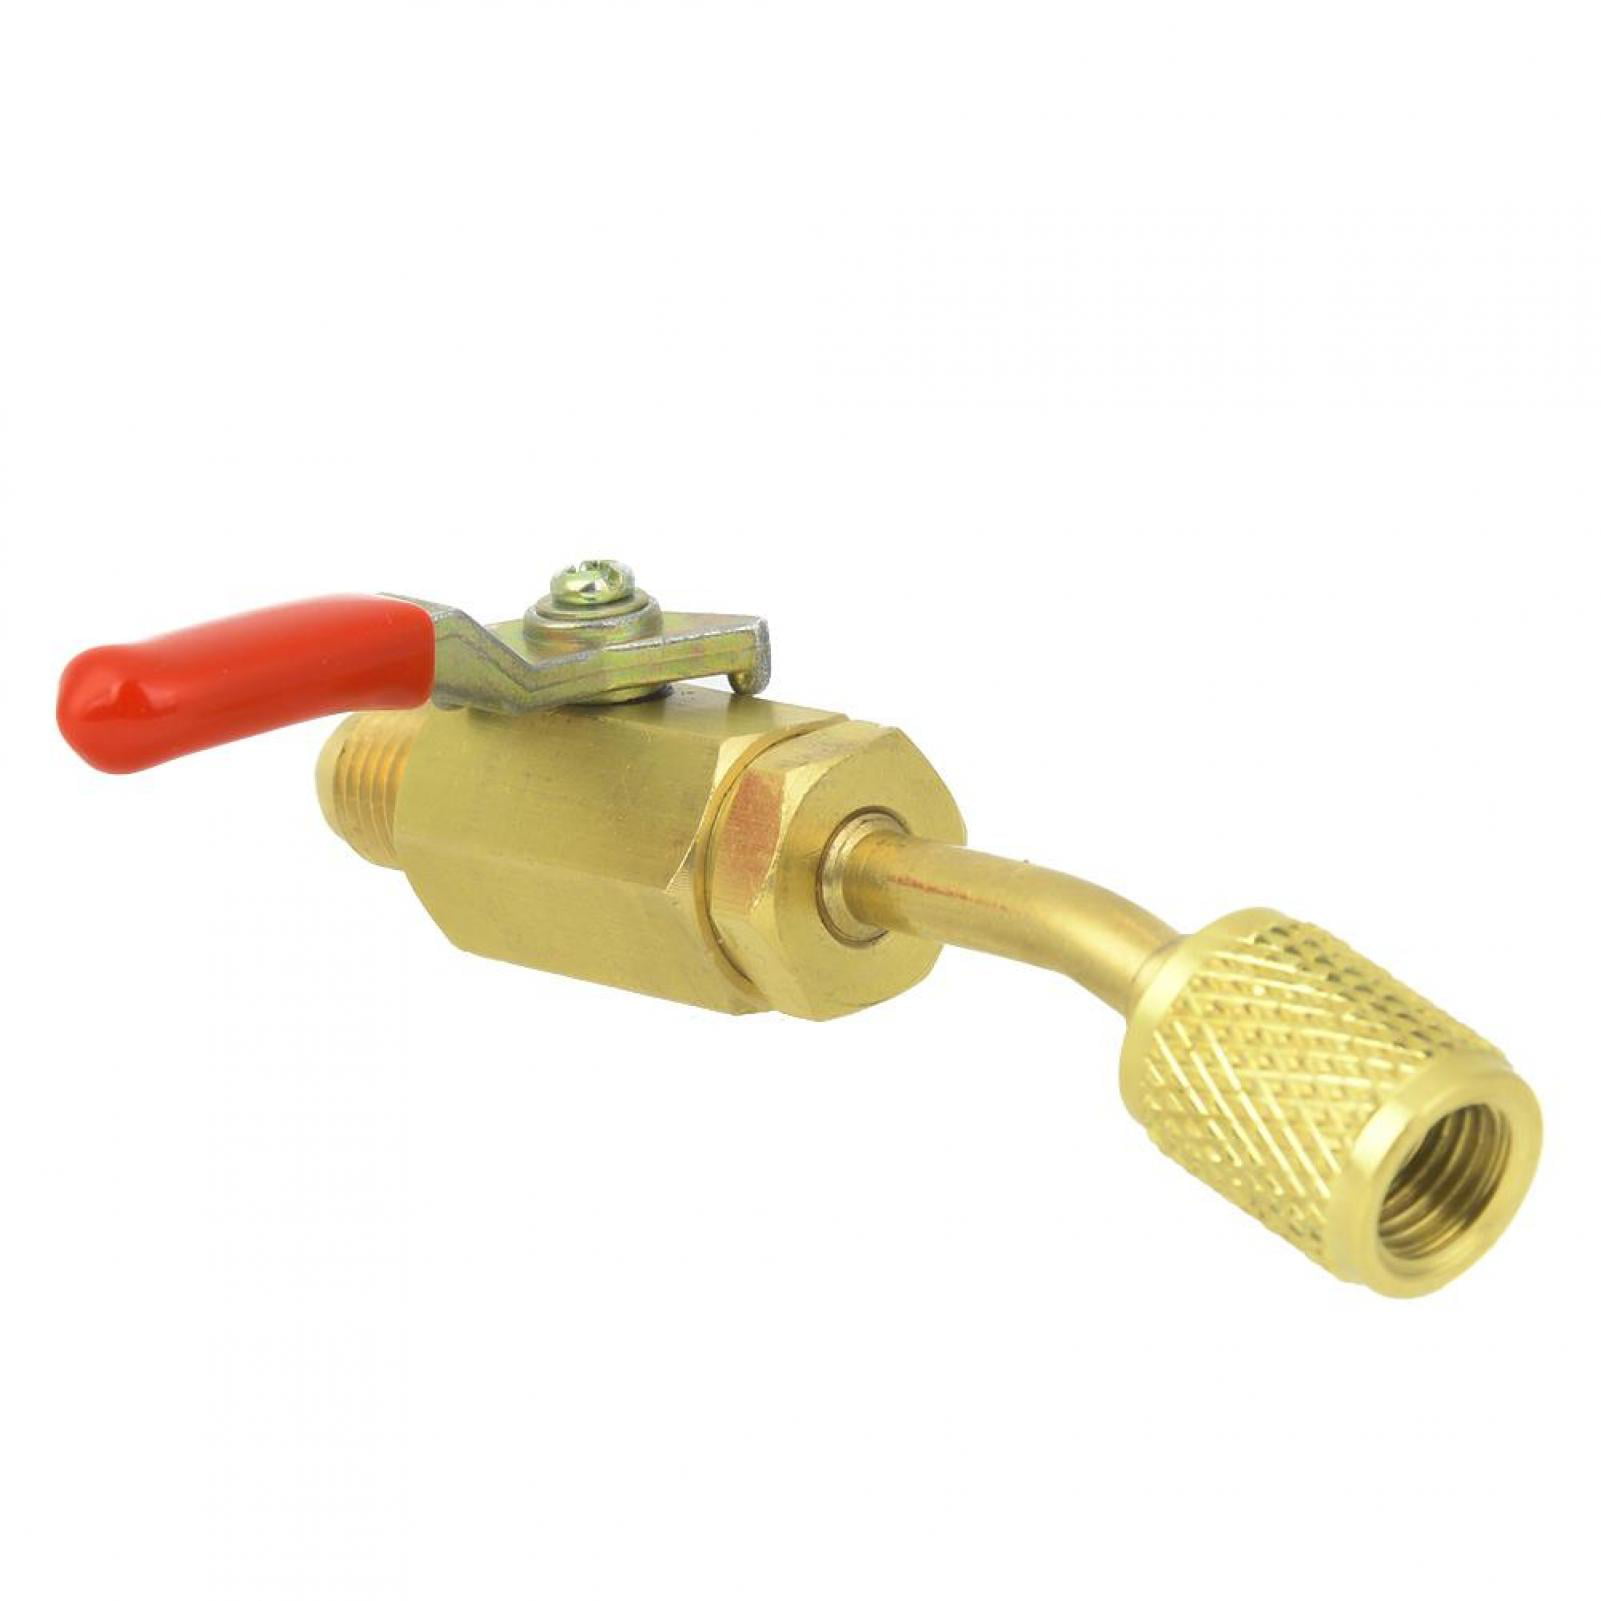 Red Ball Valve 1/4in Arc Brass Manual Shut-Off Ball Valve R12/R134A/R410A for Refrigeration Equipment